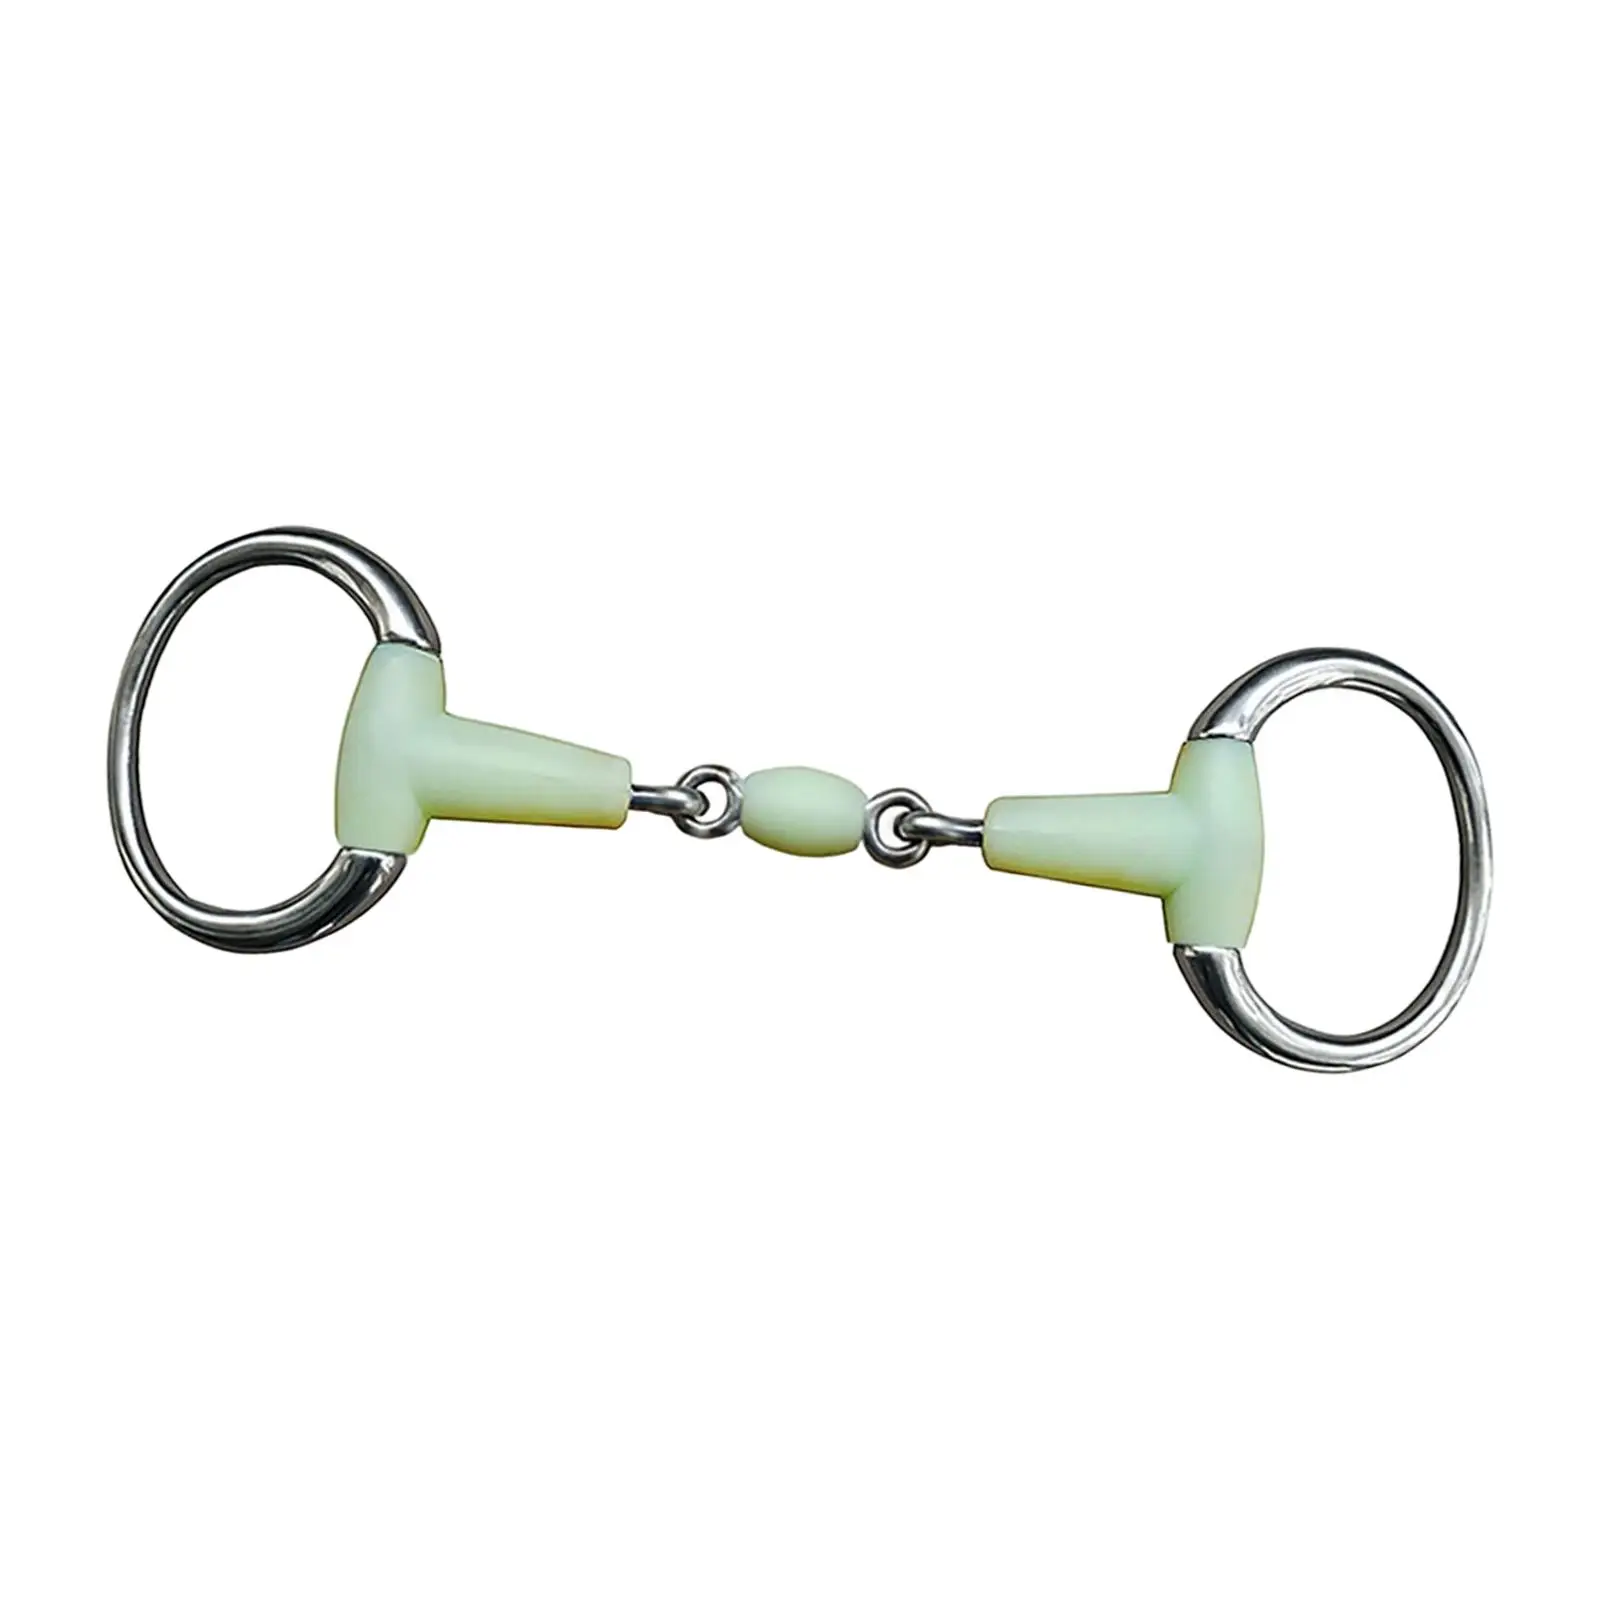 Ultralight Horse Ring Bit Equestrian Accessories for Horse Riding Equipment Supplies